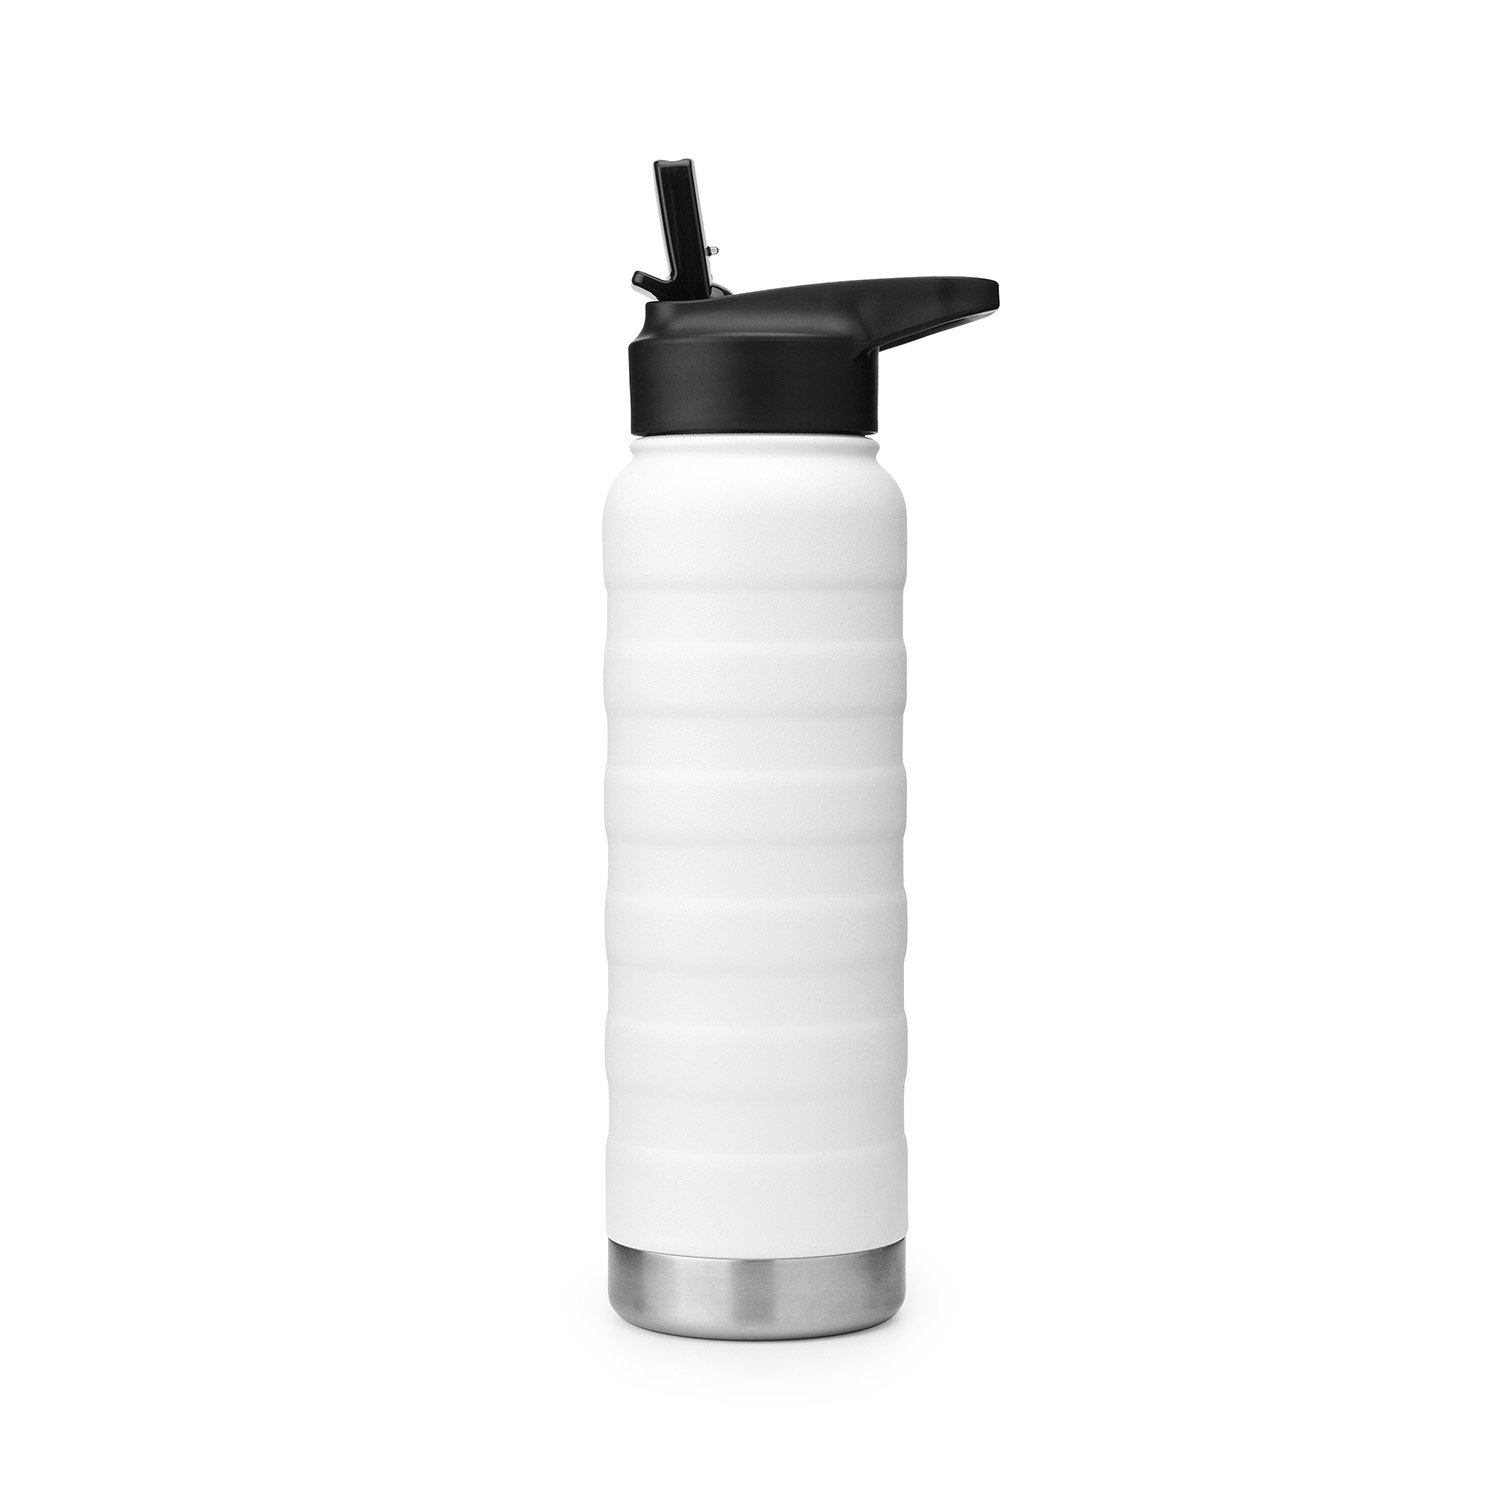 Vessel 24 oz Vacuum Insulated Stainless Steel Drink Bottle with Straw Cap